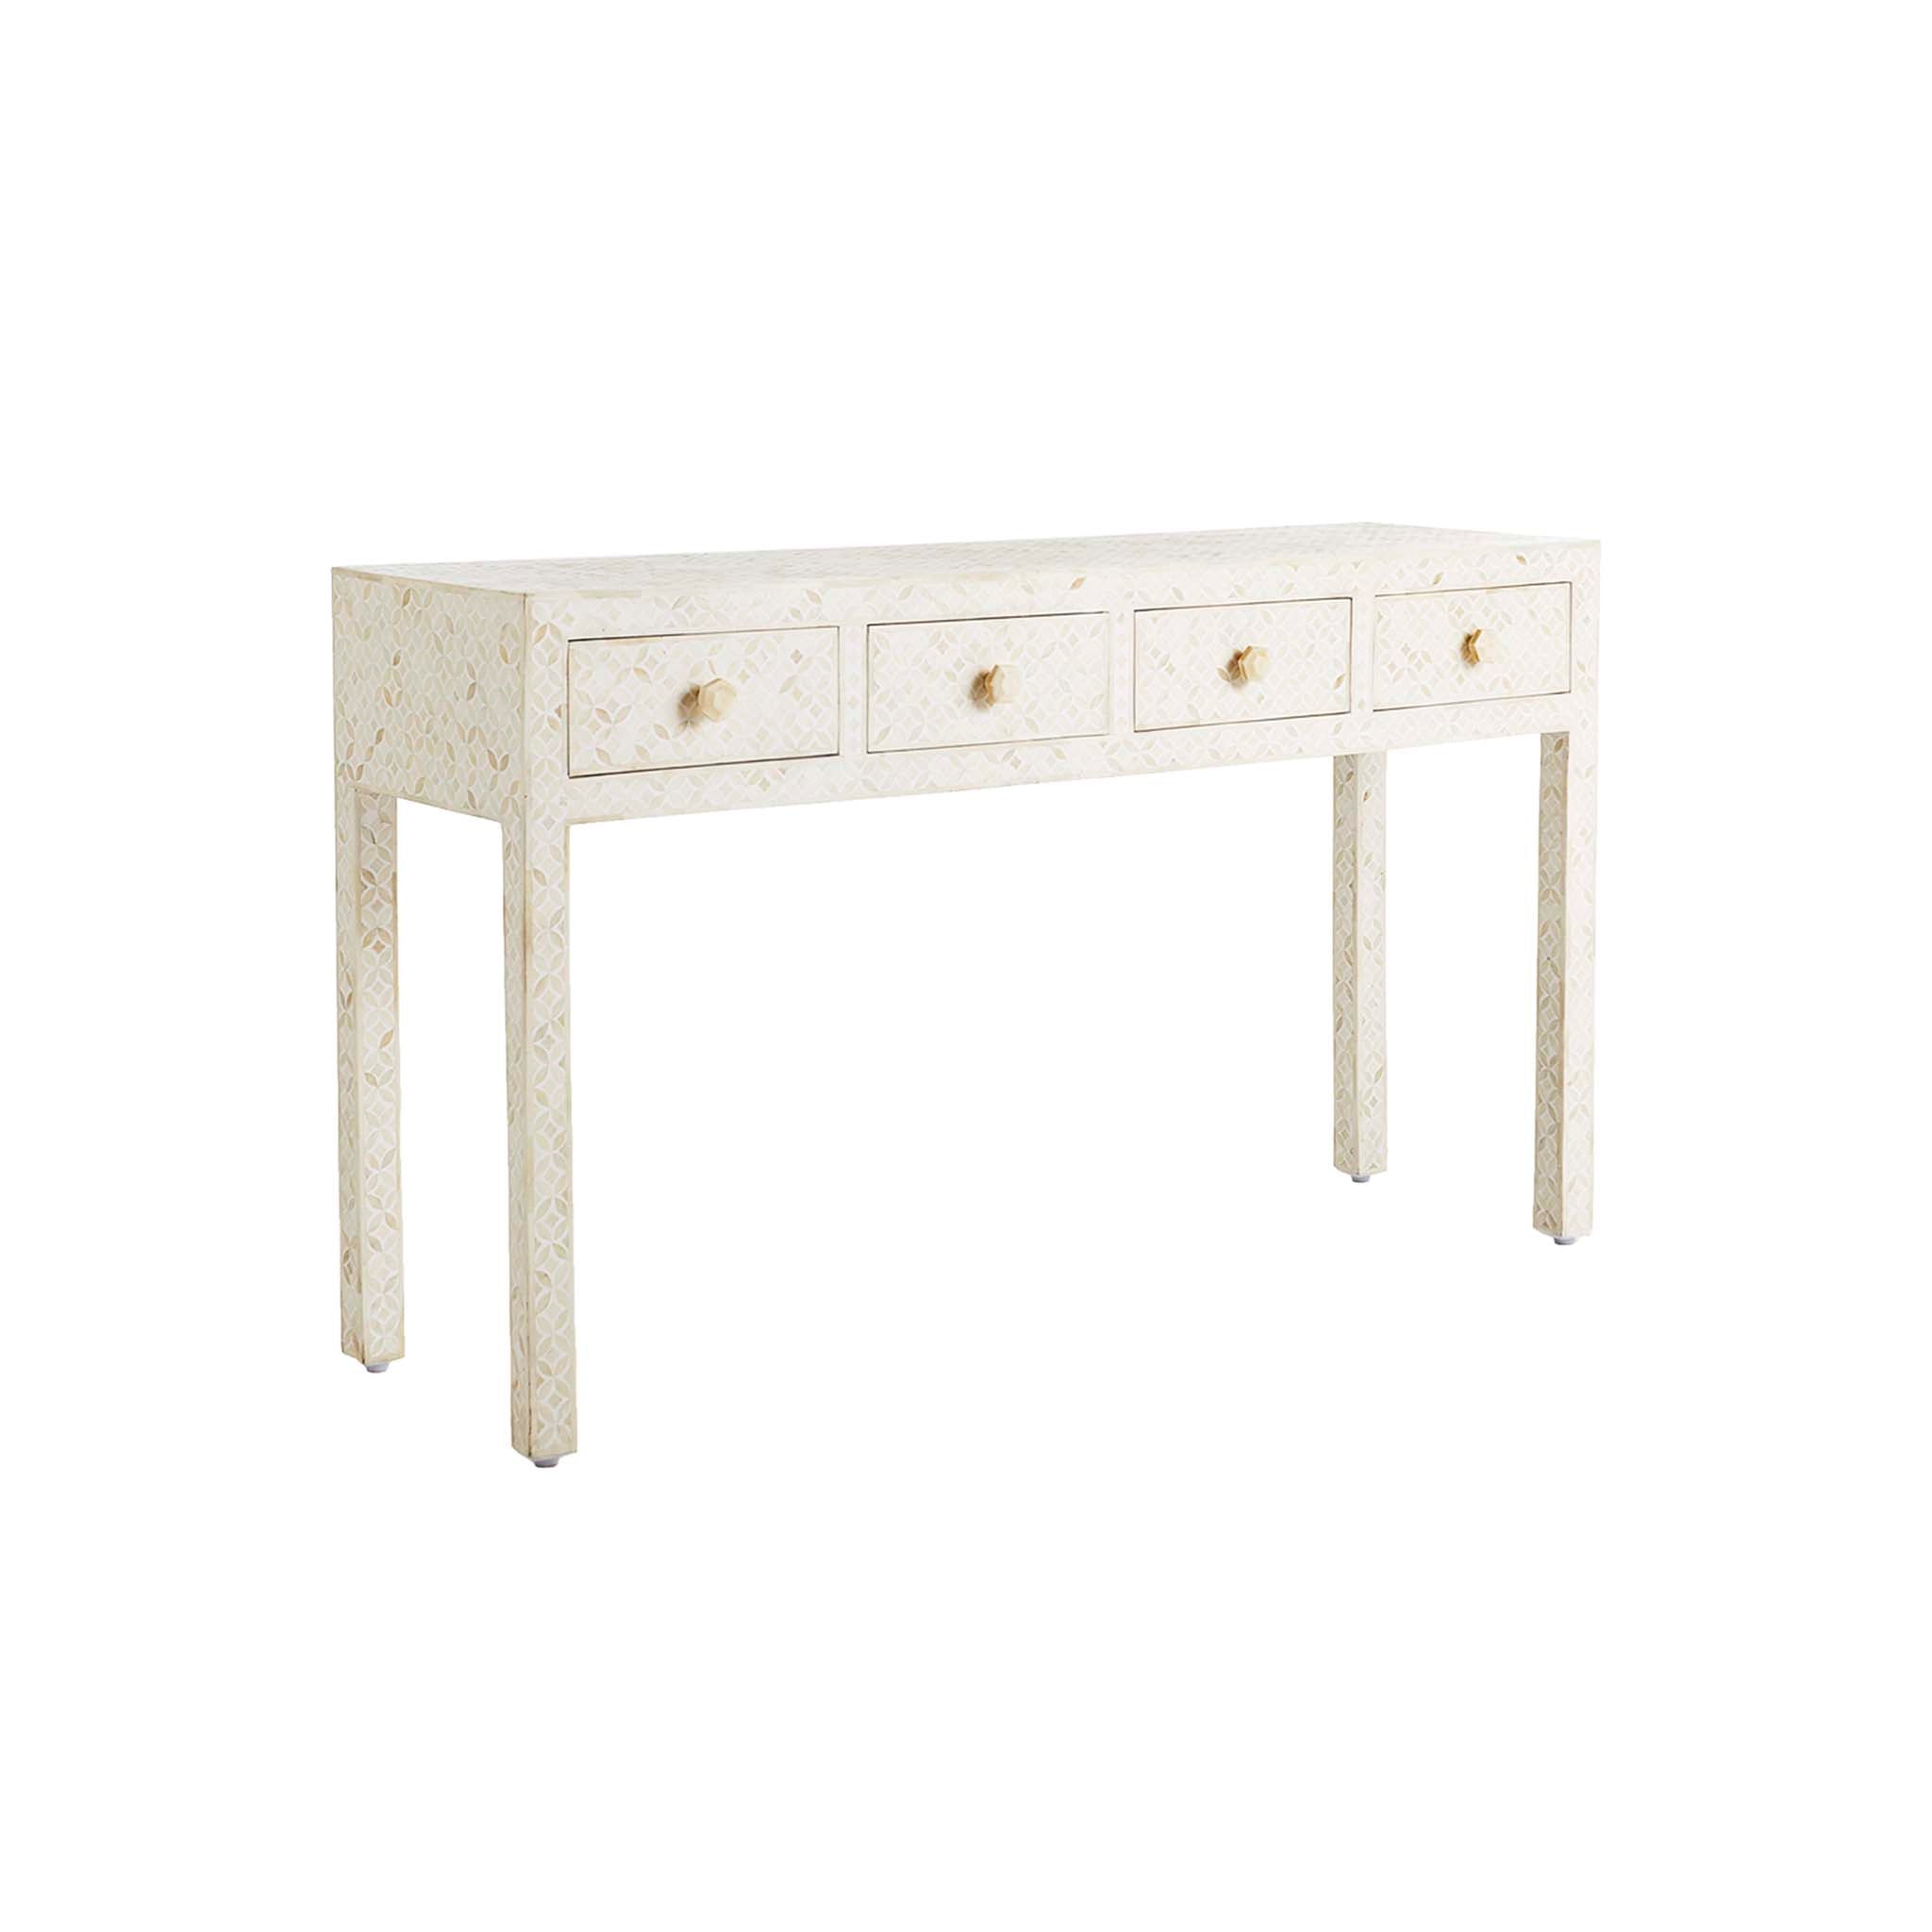 Reflections Bone Inlay Console